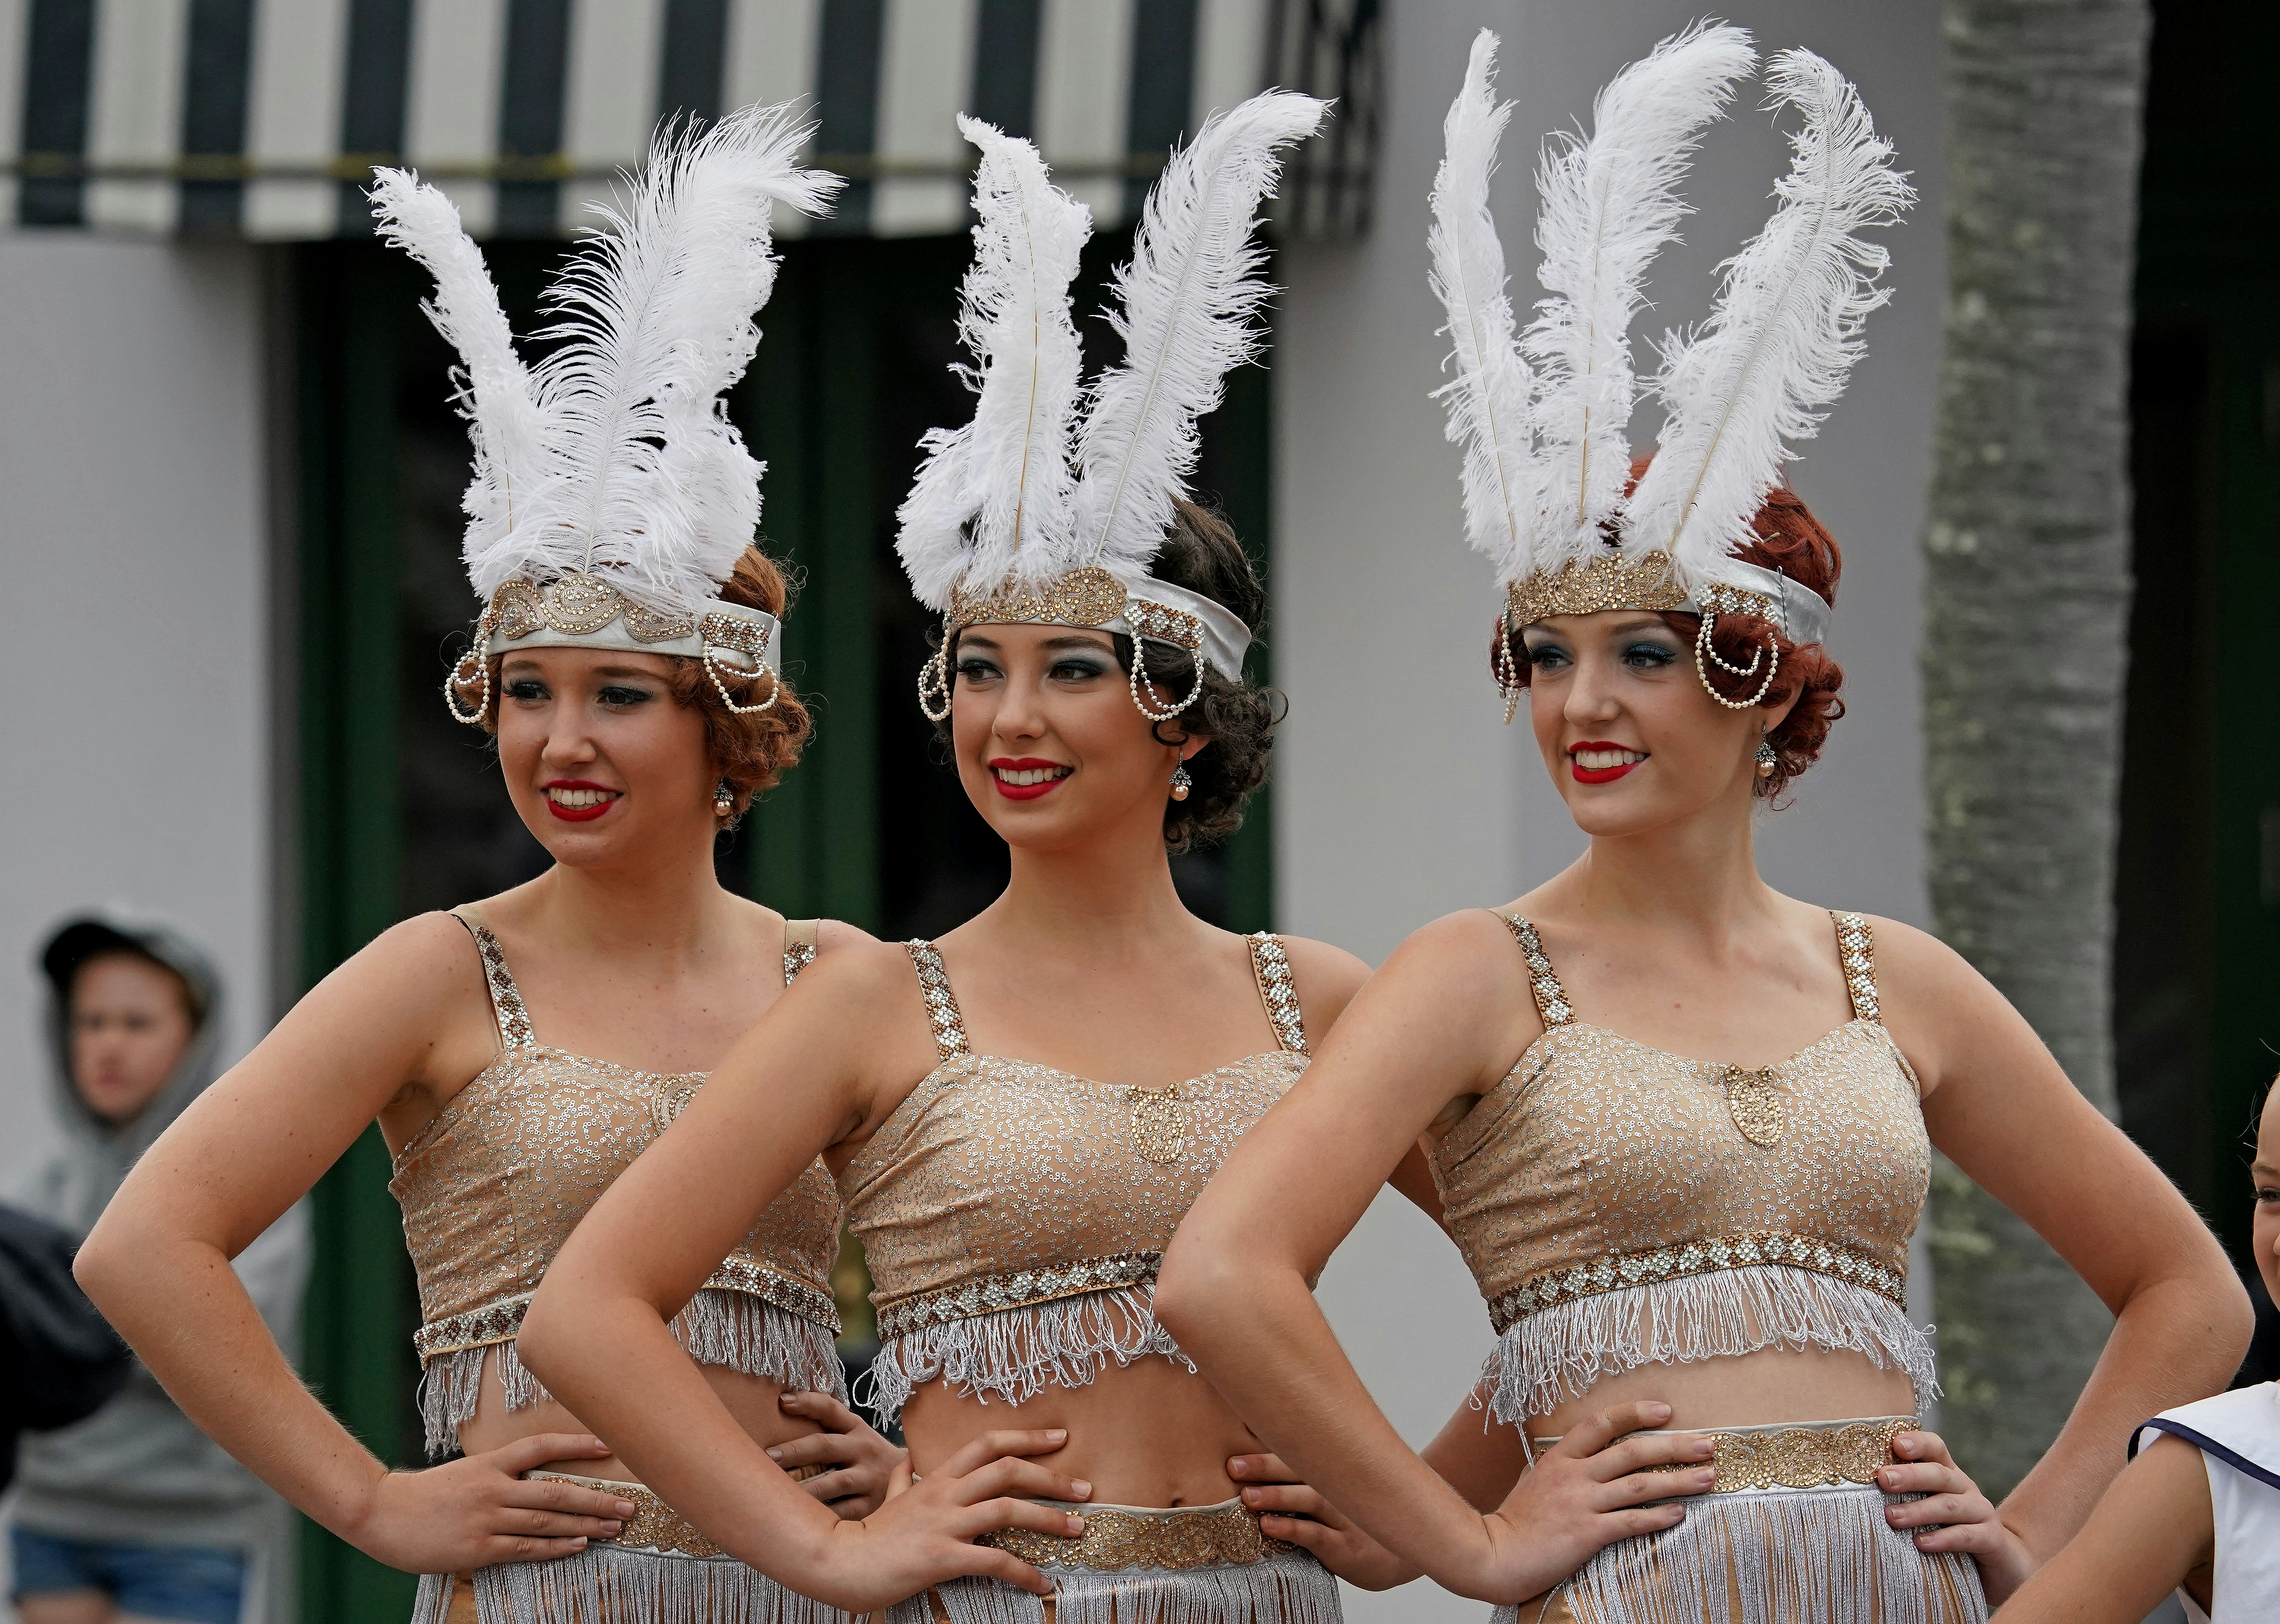 Ladies dressed as 1920s showgirls pose wearing white feather headbands and sparkly tops with fringe at the Napier Art Deco Festival